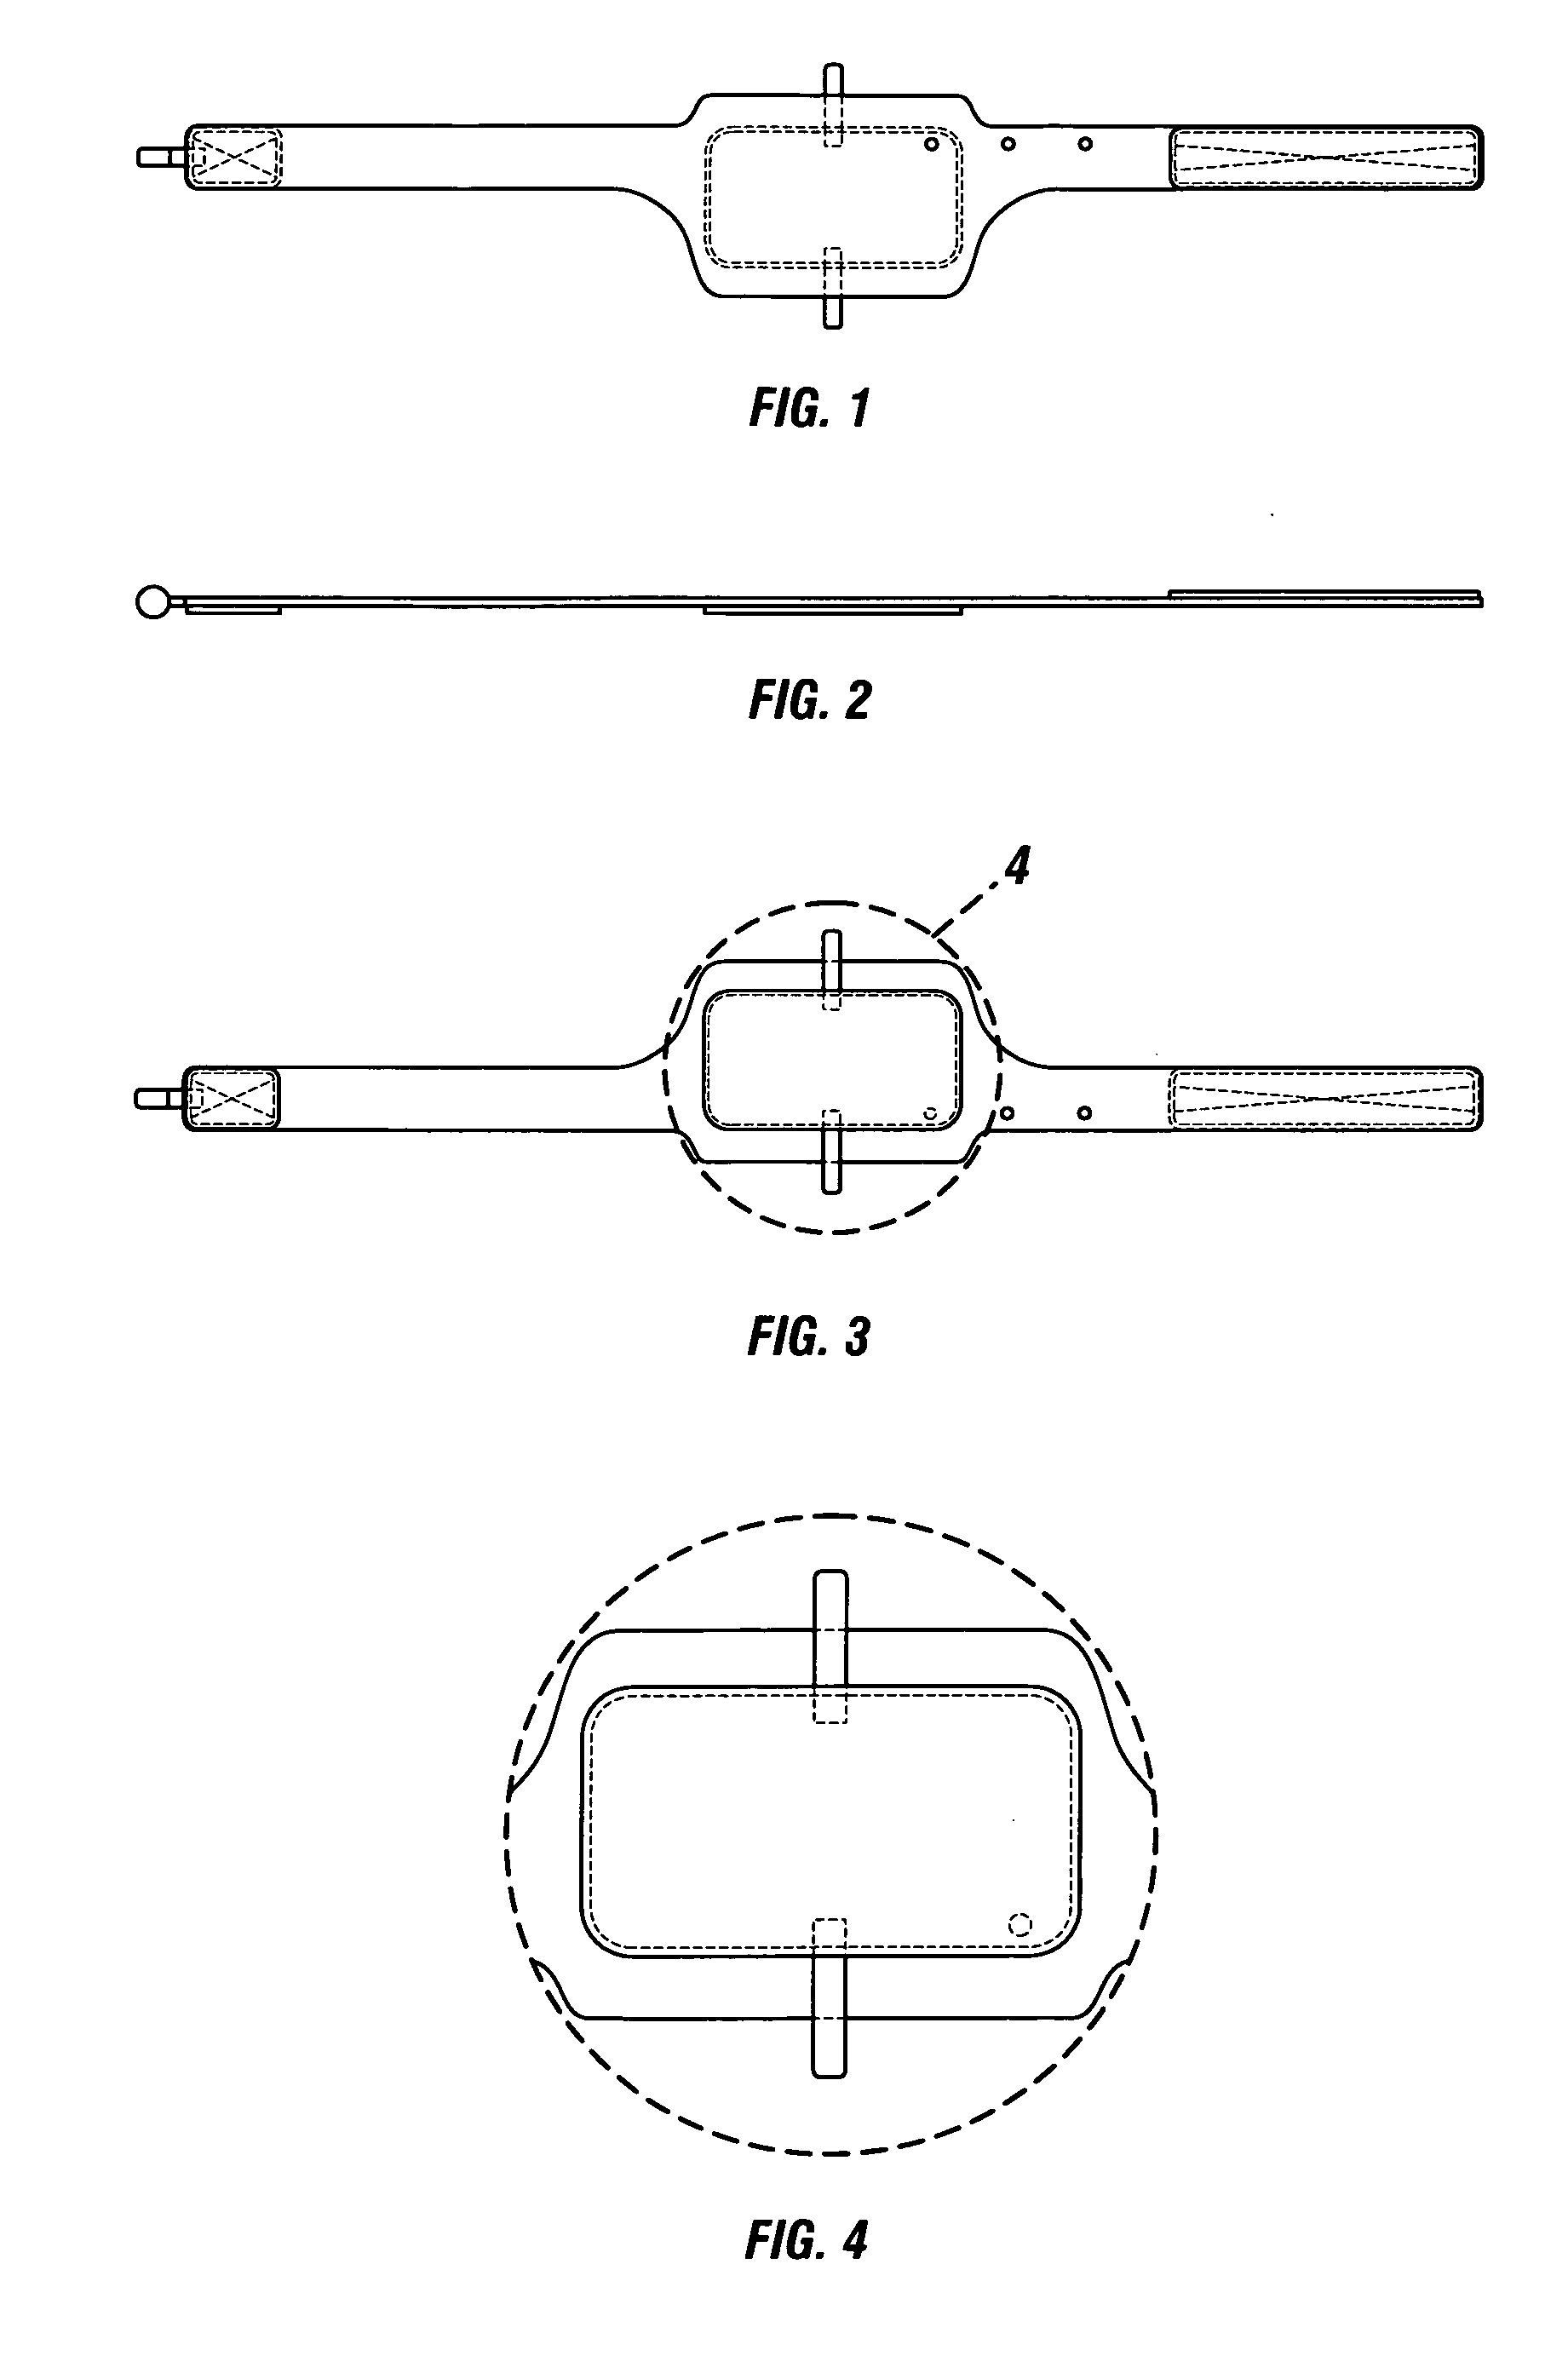 Method and apparatus for improving truncal control